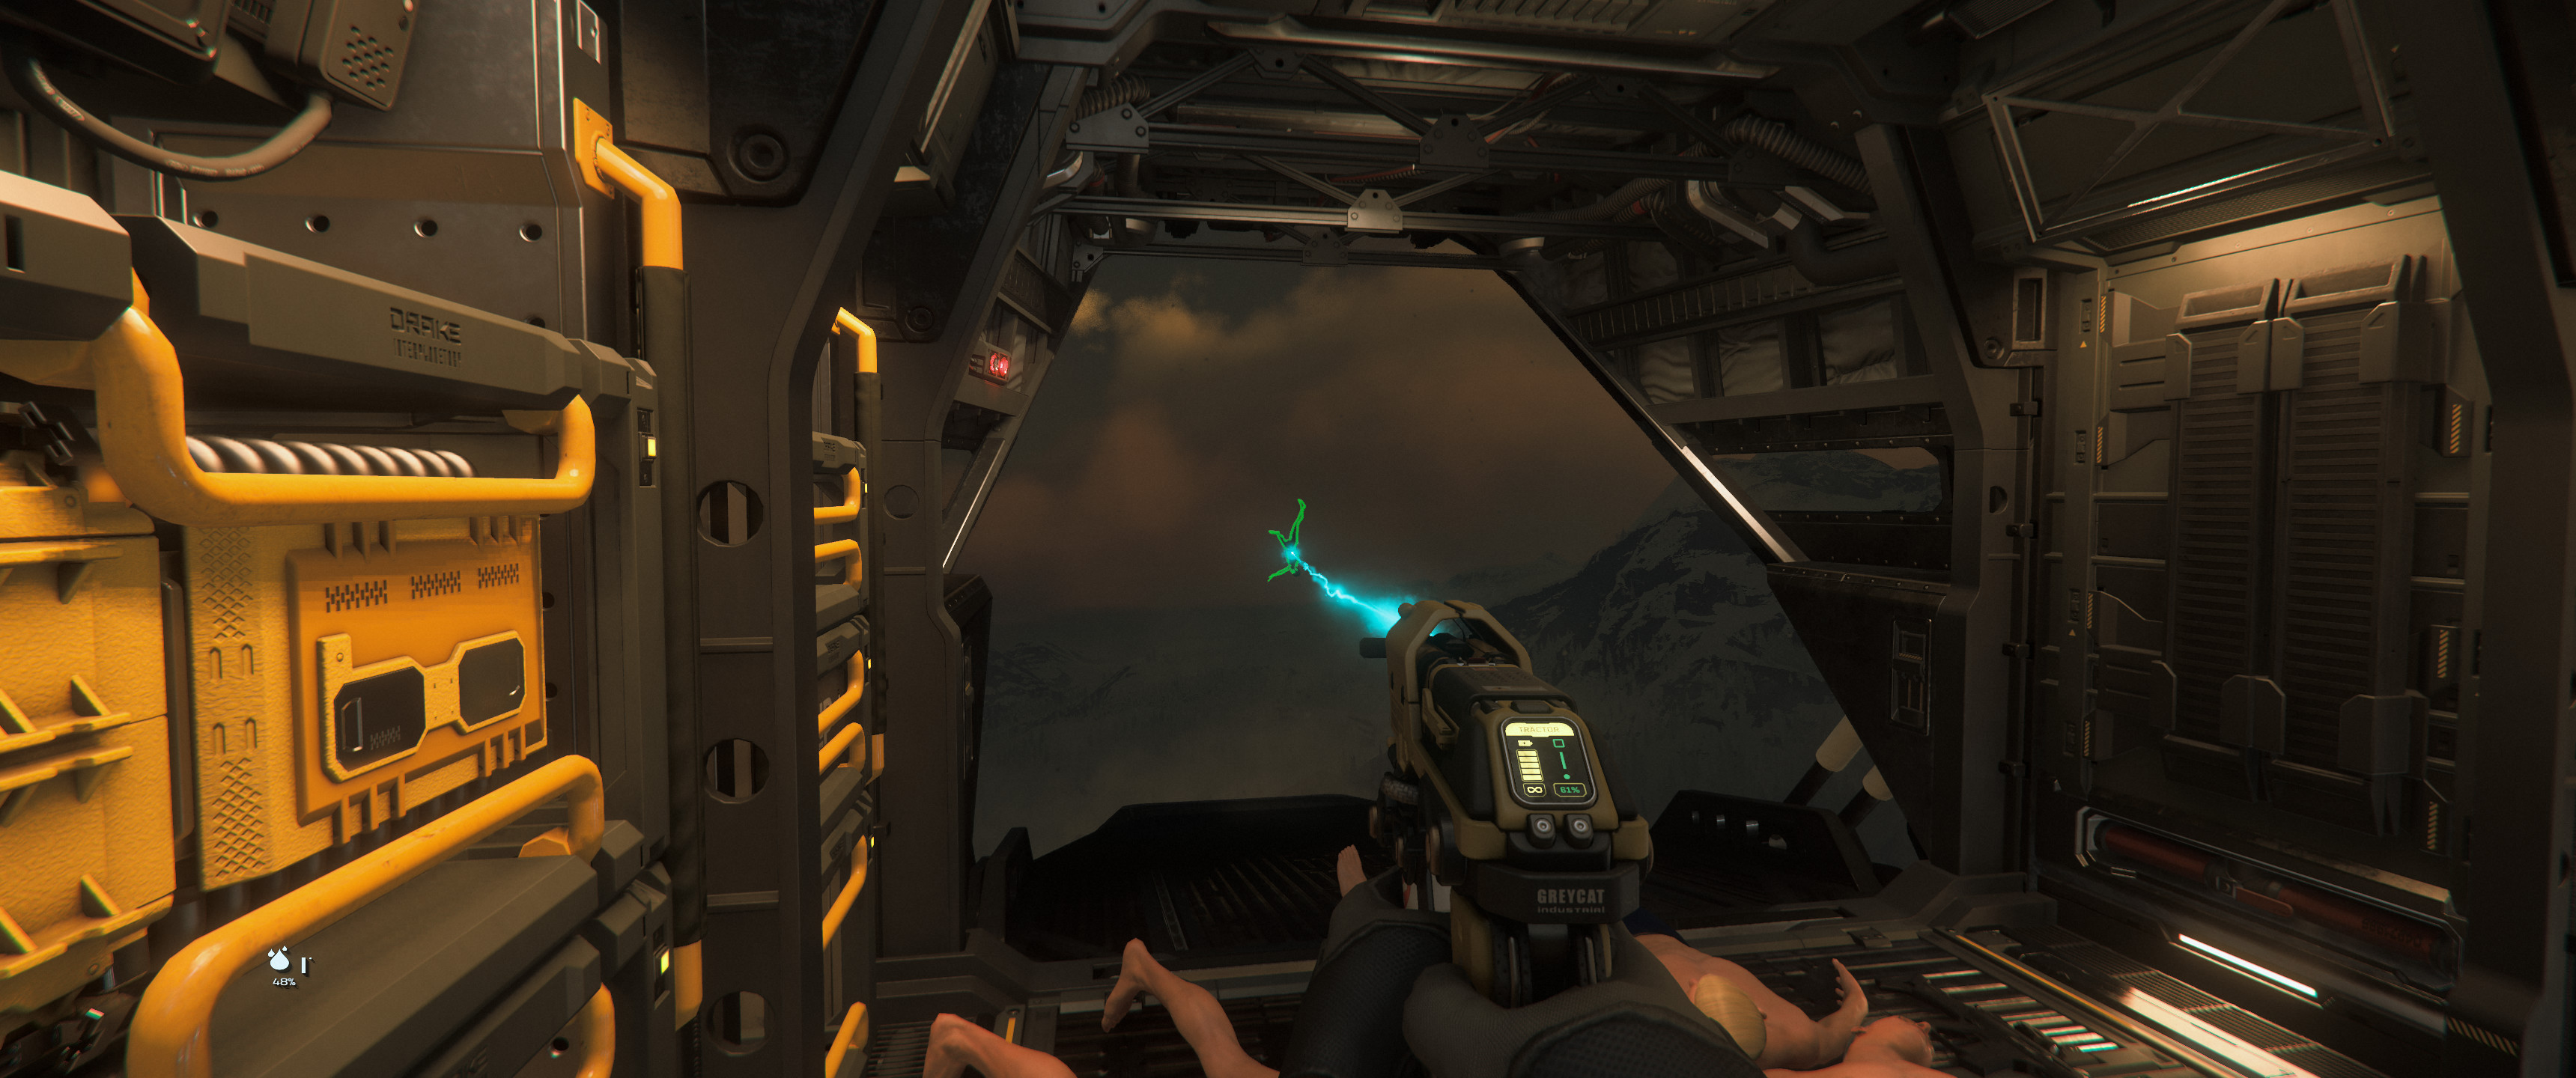 First-person view inside a ship with its back ramp open high above a mountain range at dusk, with a handheld tractor beam gun pushing a male body in boxer briefs from a pile in the ship out into the air